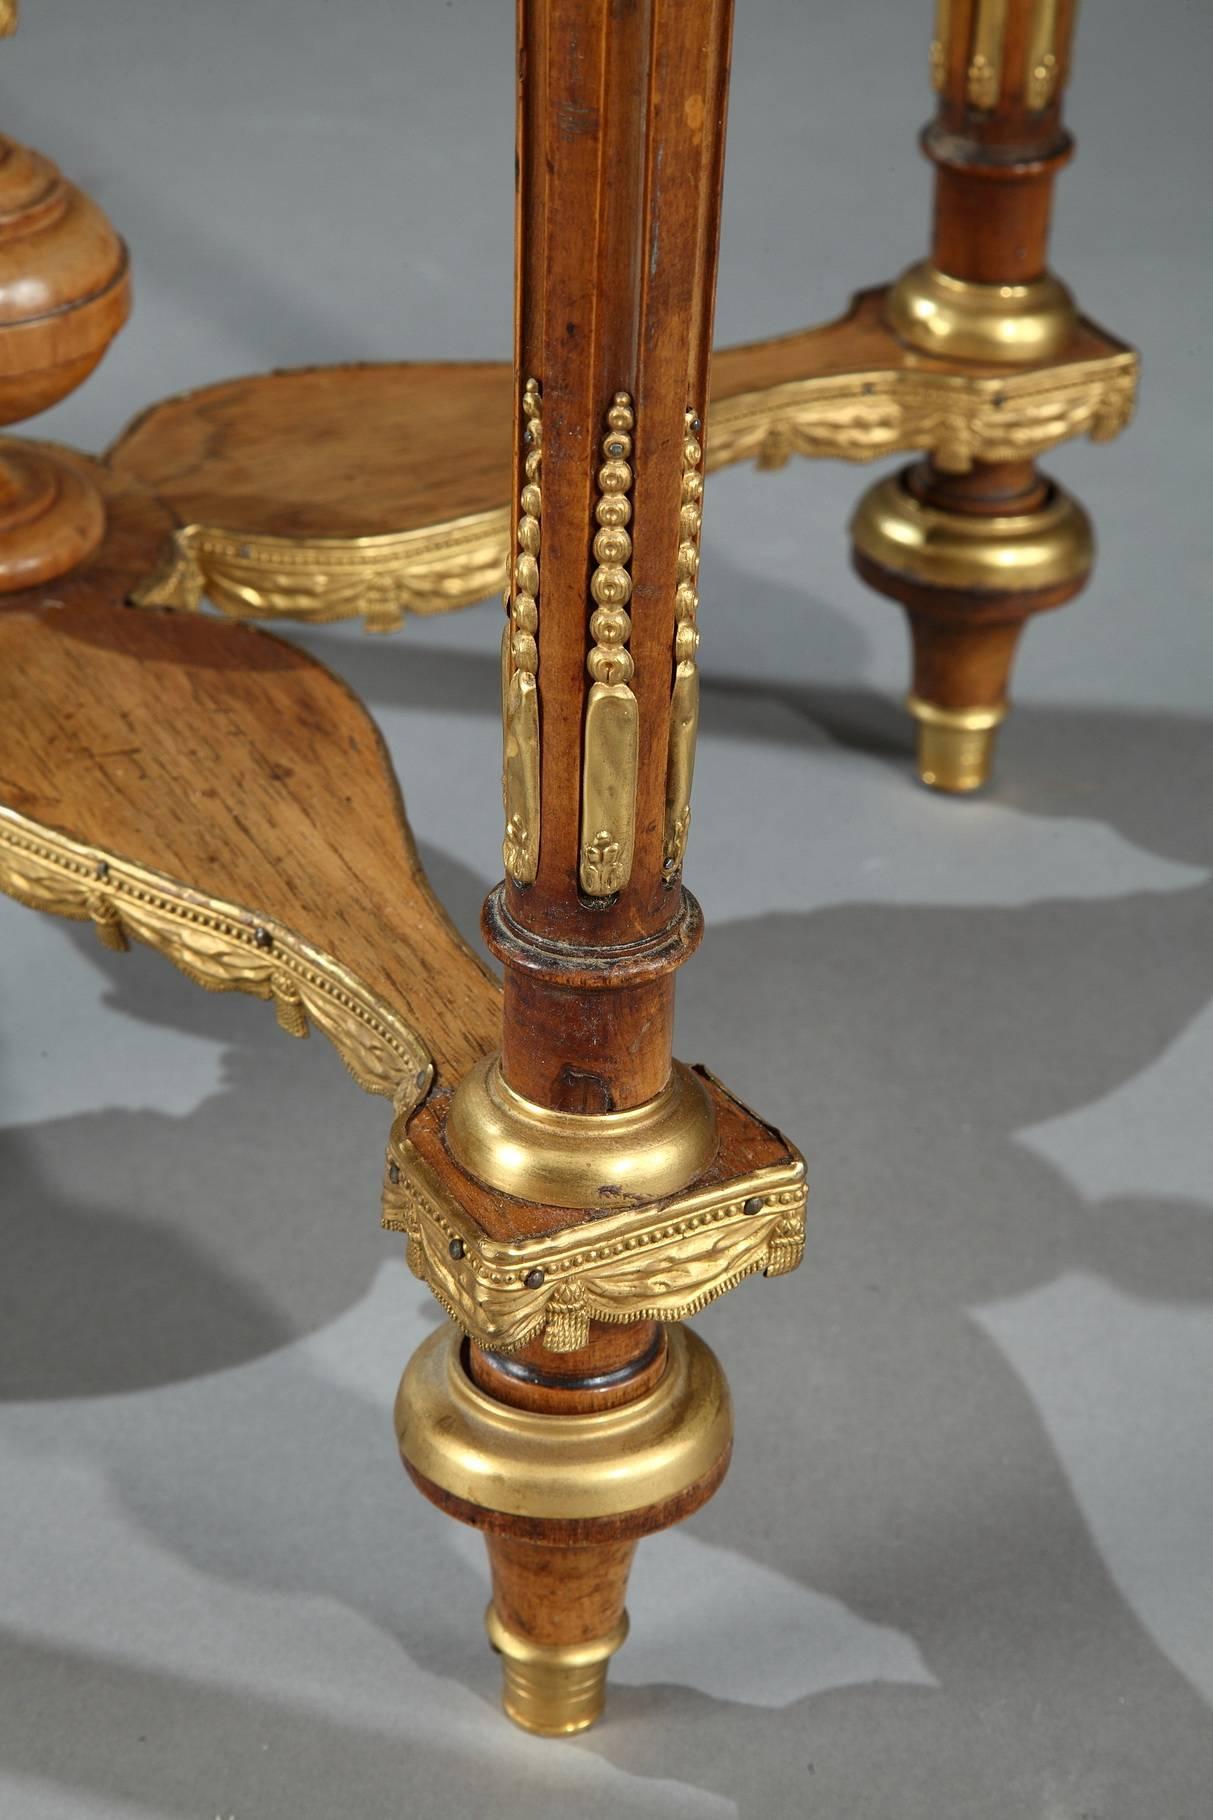 Napoleon III ash gueridon table with bronze and brass accents in Adam Weisweiler (German, 1746-1820) taste. This Louis XVI-style gueridon is composed of a circular, royal-red marble top ringed with an openwork rim. The body of the table is